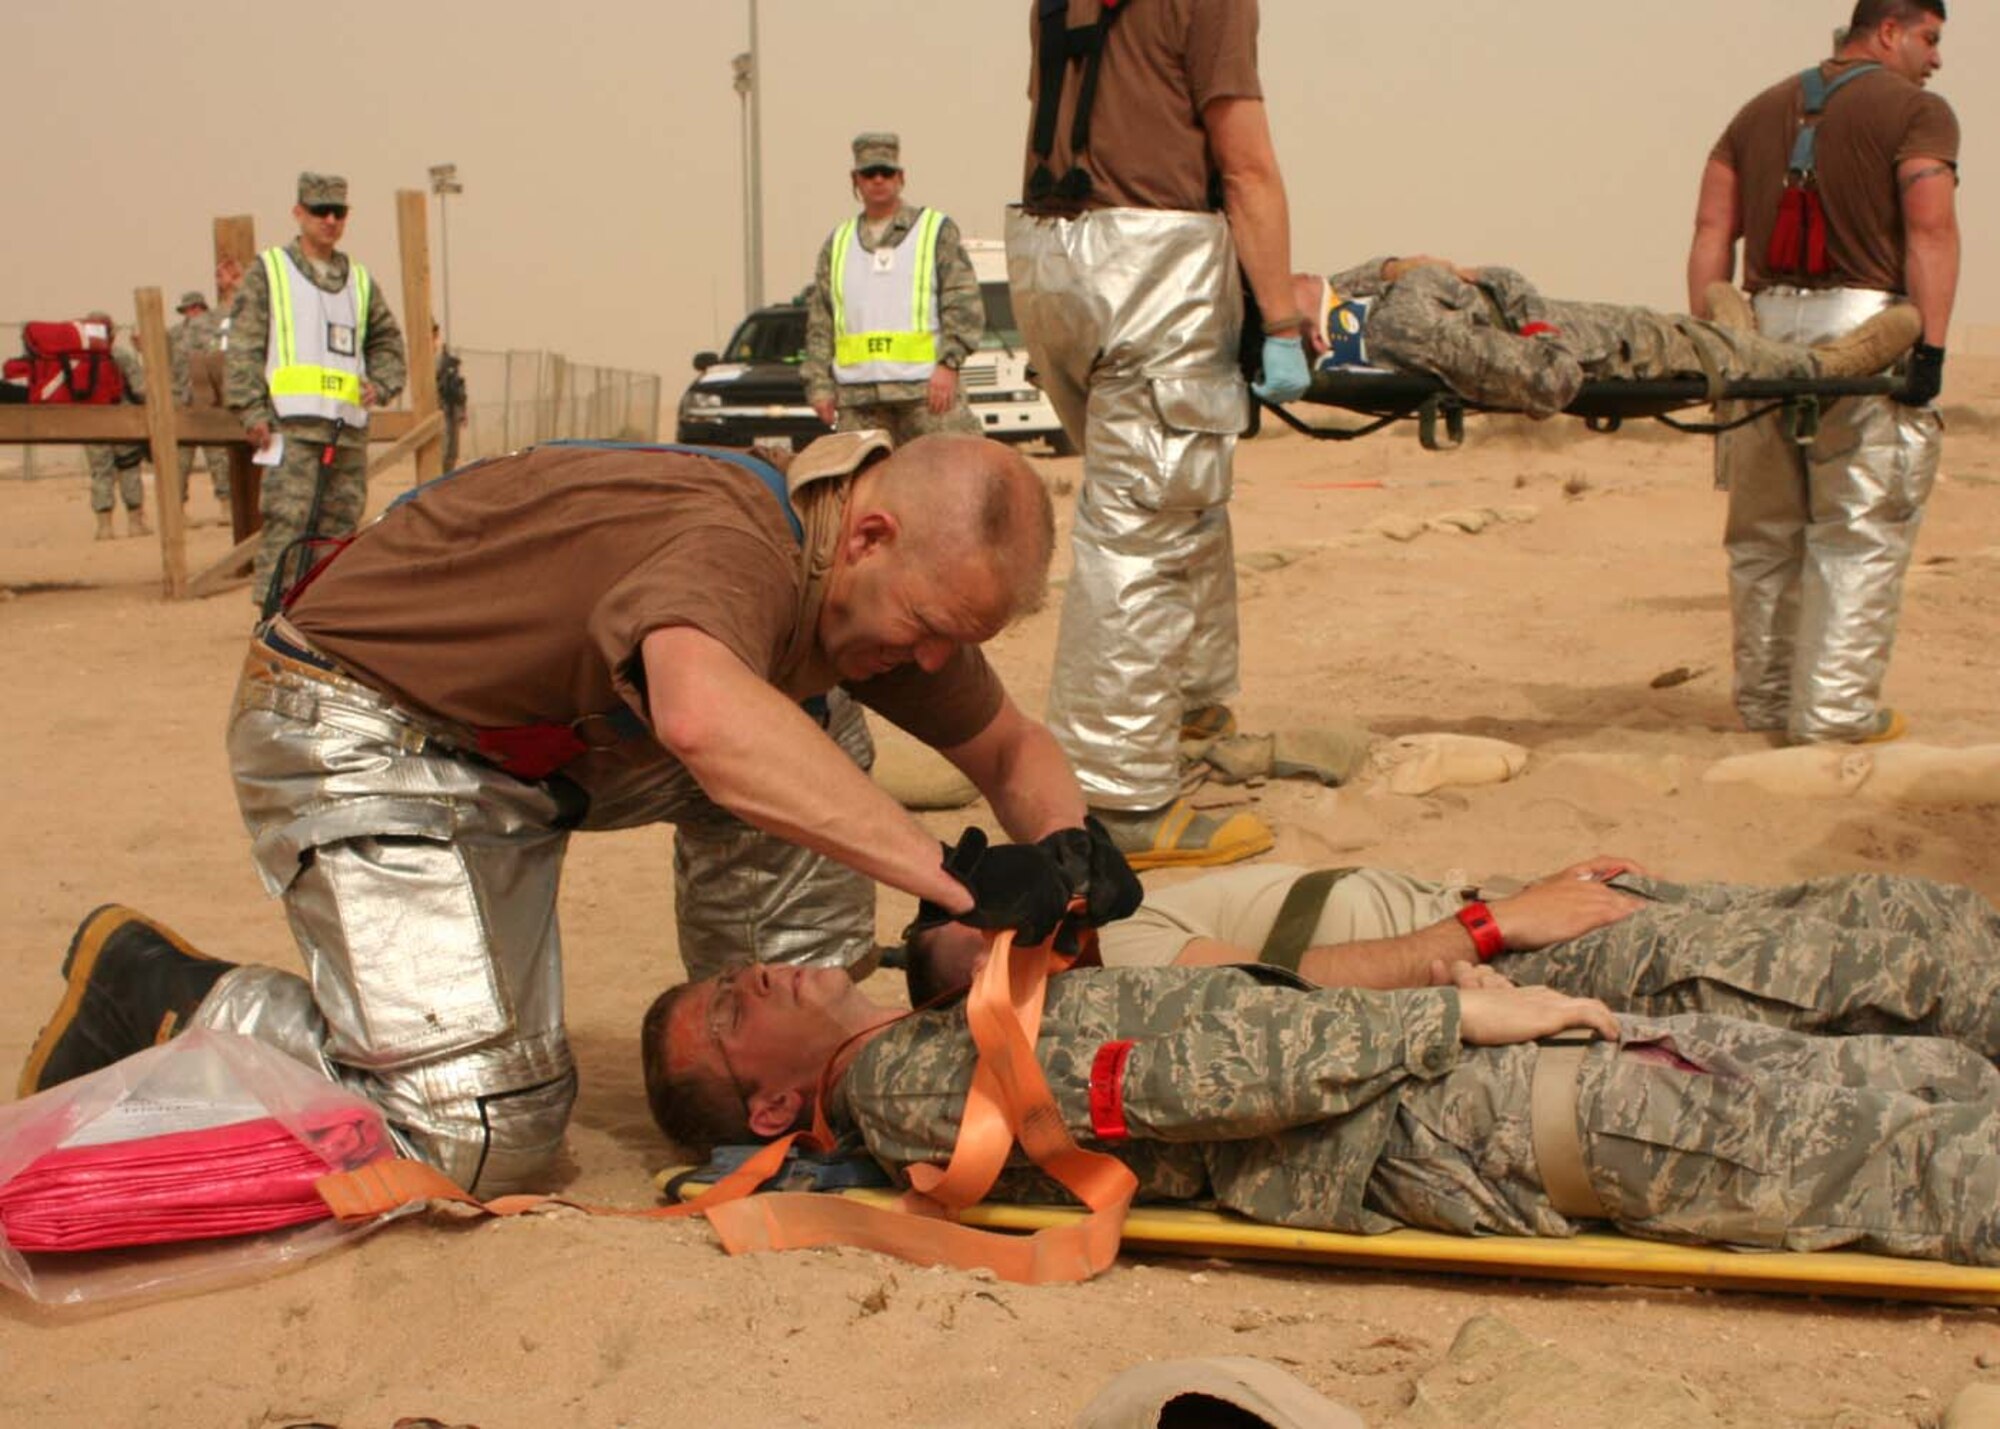 SOUTHWEST ASIA -- Tech. Sgt. Craig Moore, 386th Expeditionary Civil Engineering Squadron, buckles down a mock victim for transport to the clinic during an exercise at an air base in Southwest Asia, Feb. 23. The exercise was an evaluation of multi- agency response to a mass casualty incident to include Security Forces, Fire Department and Medical teams. (U.S. Air Force photo/ Staff Sgt. Shaun Denton)